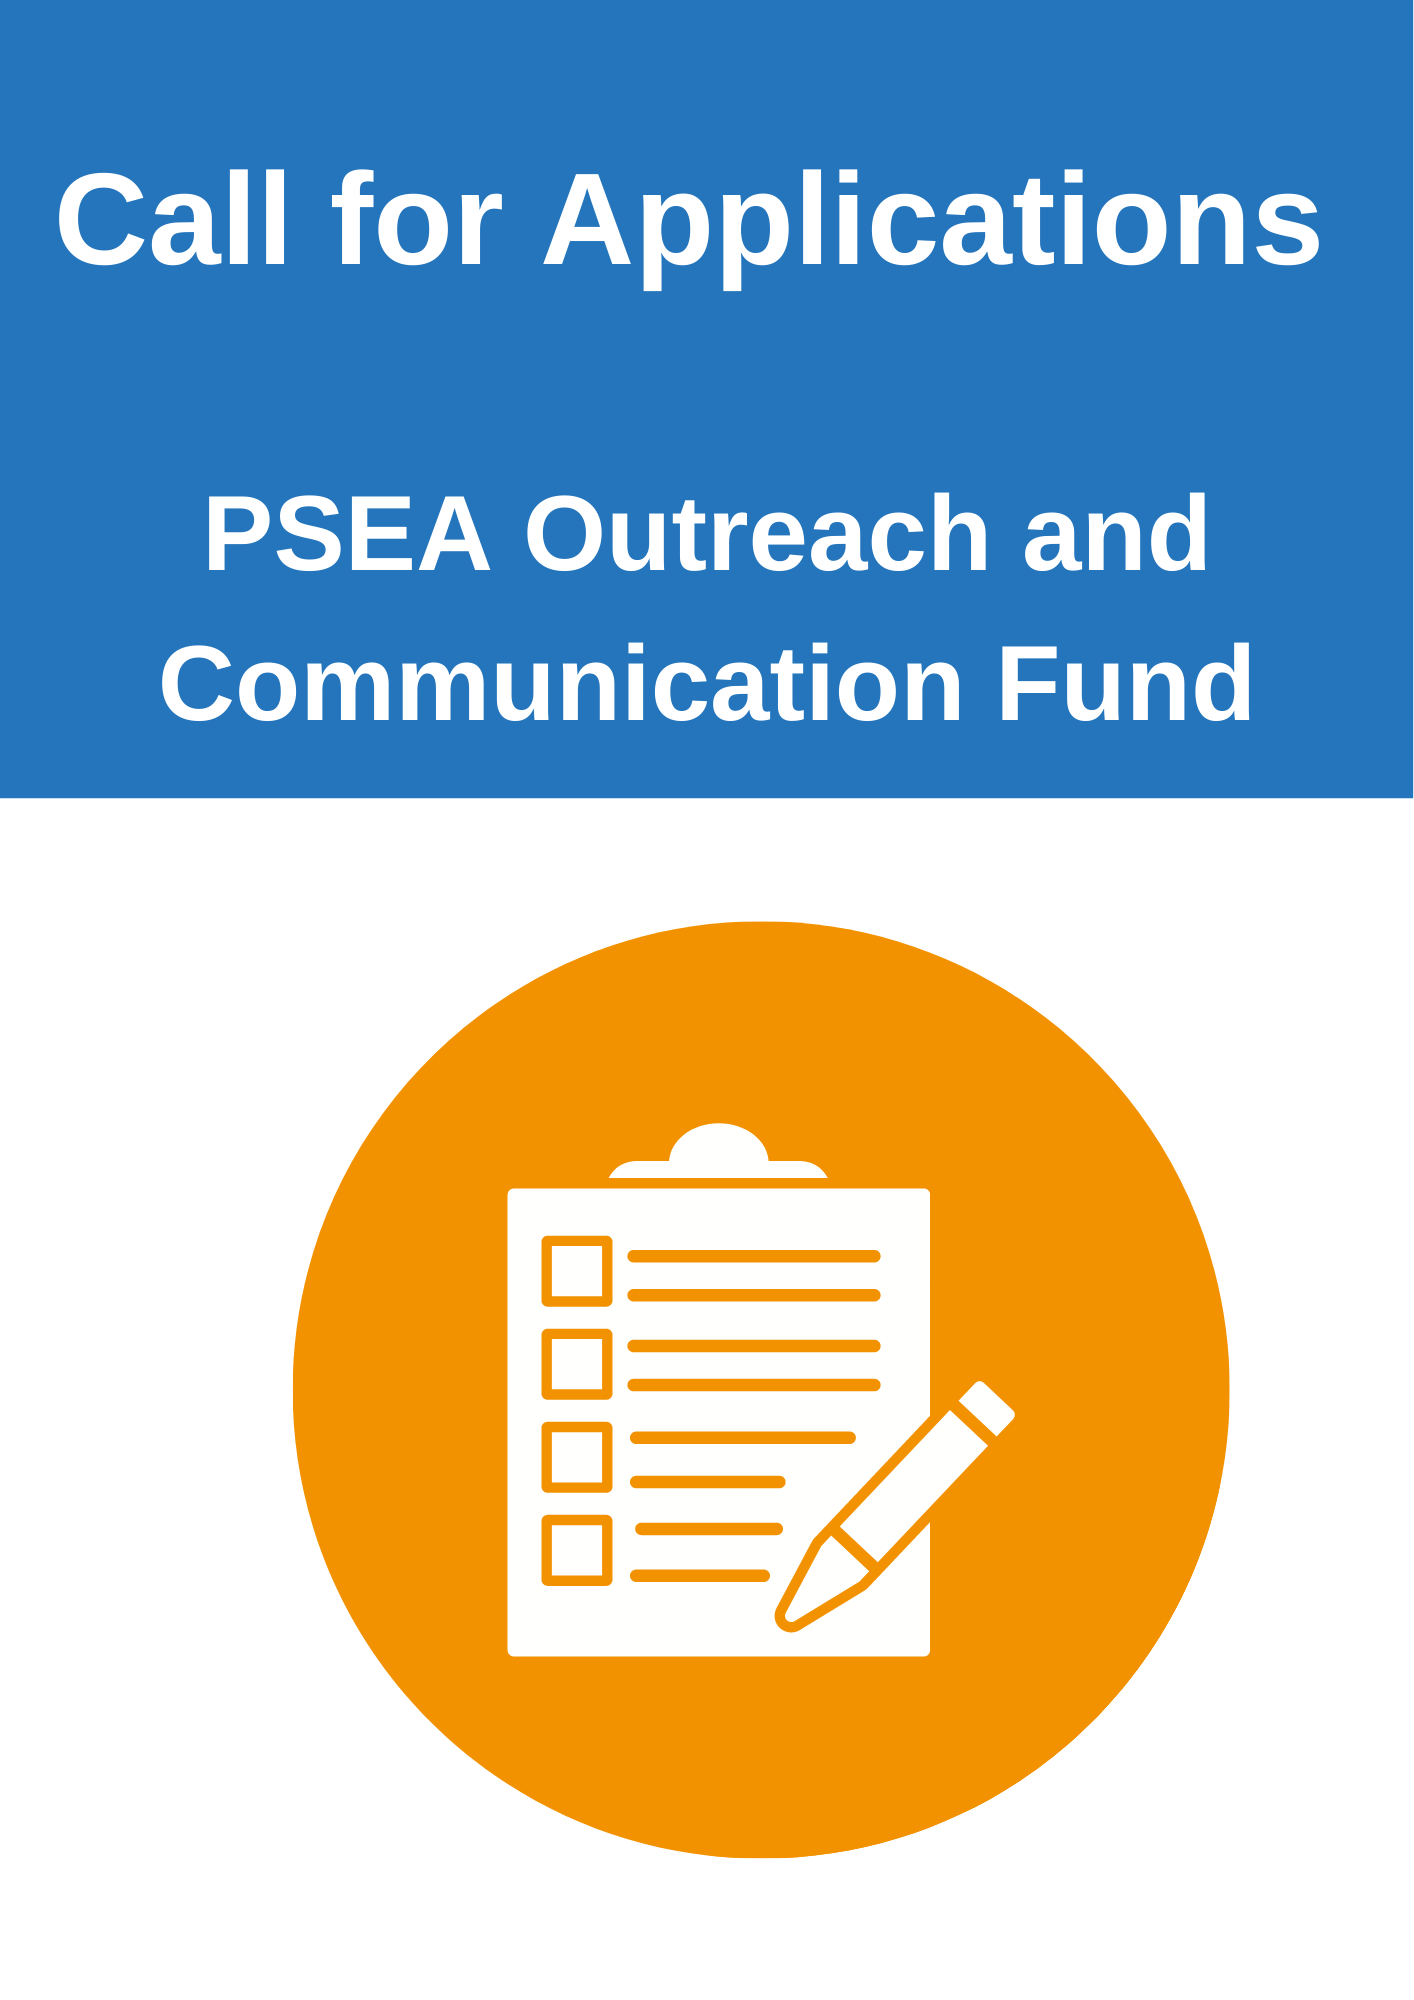 PSEA Outreach and Communication Fund